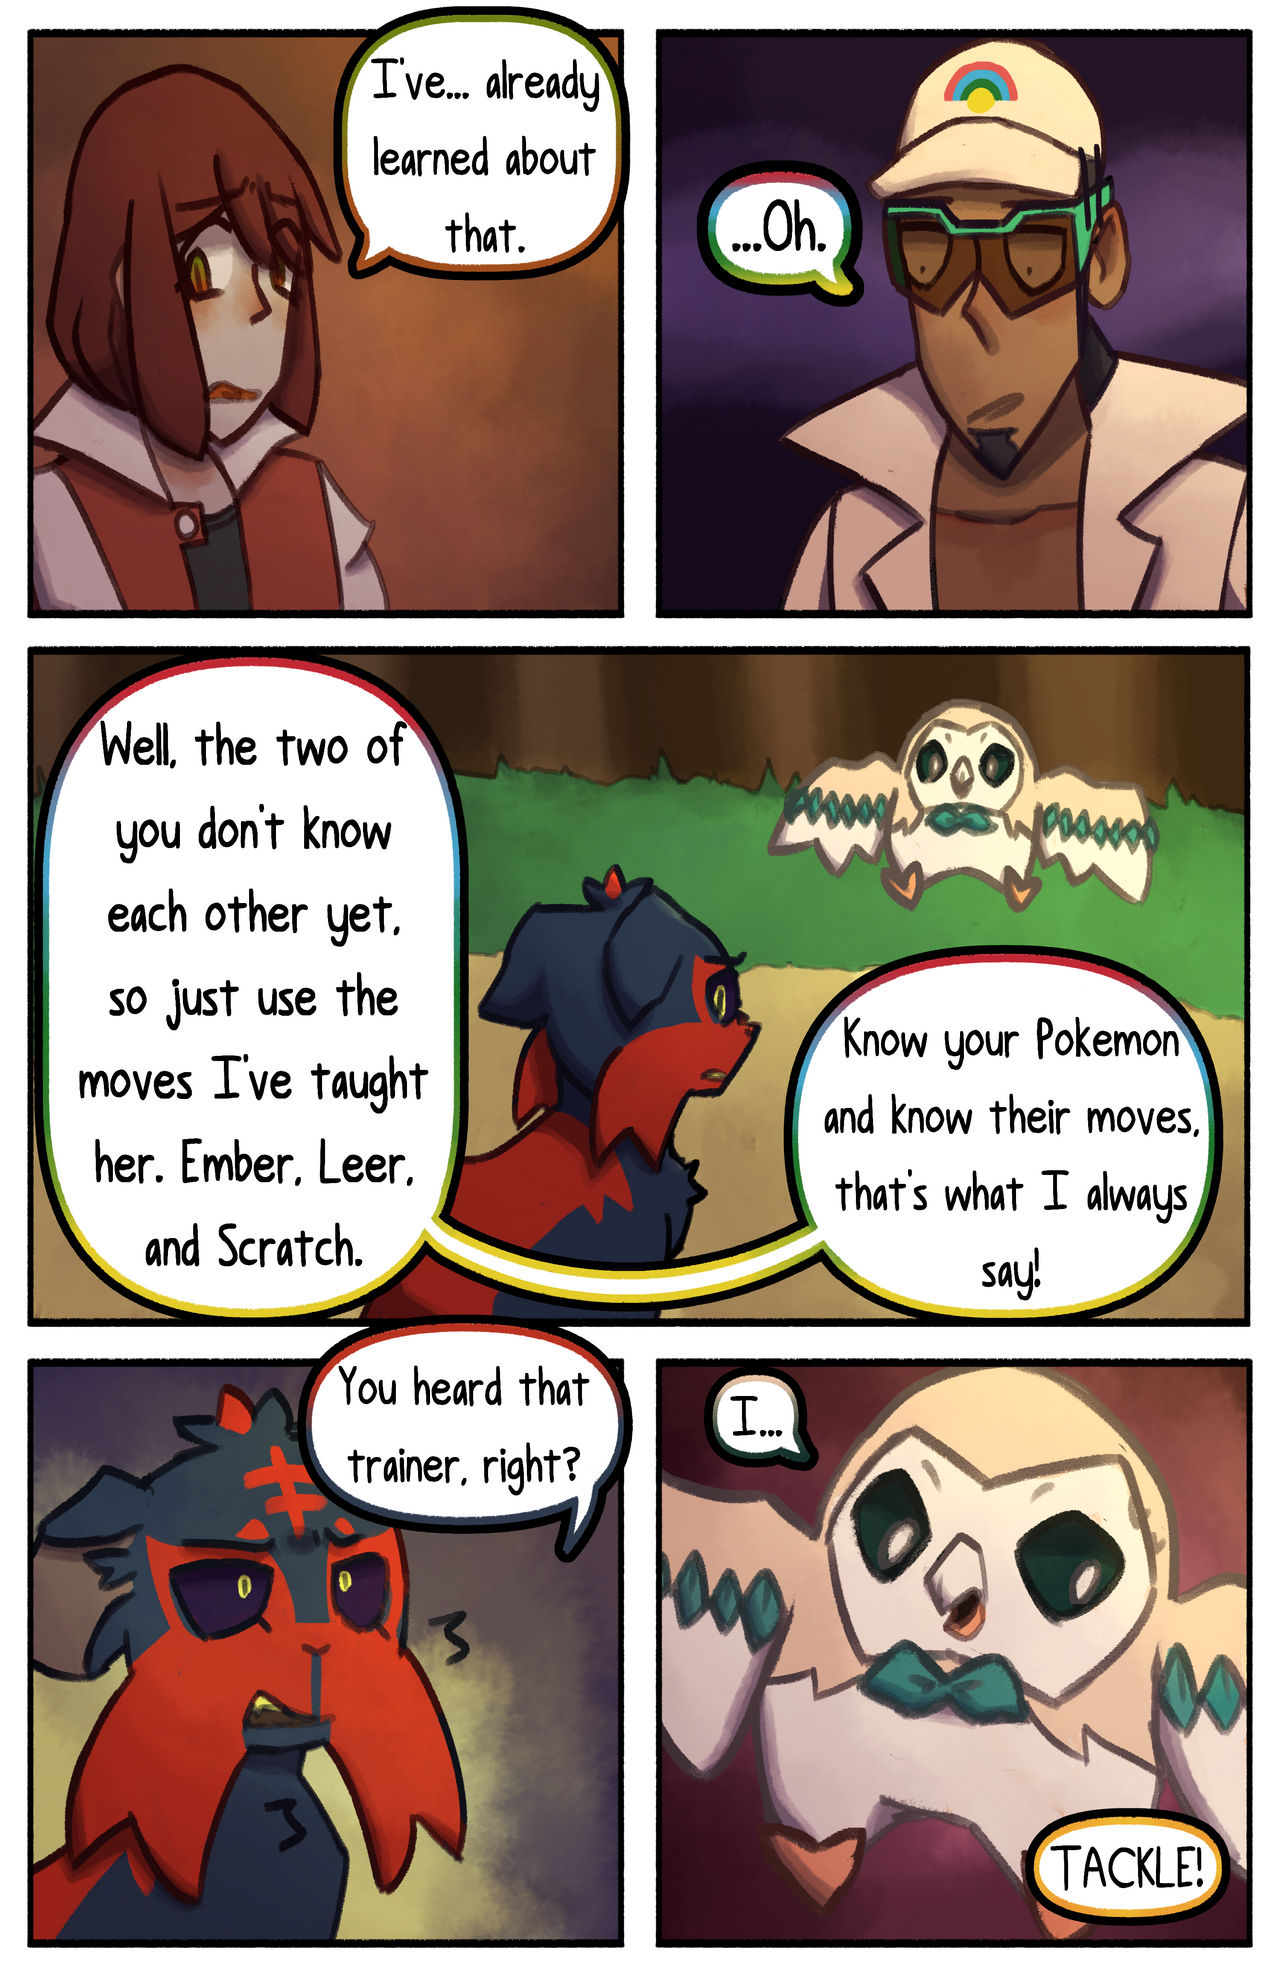 bloom__an_ultra_moon_nuzlocke___chapter_1__page_23_by_zombie_zcorge_df7za9l-fullview.jpg